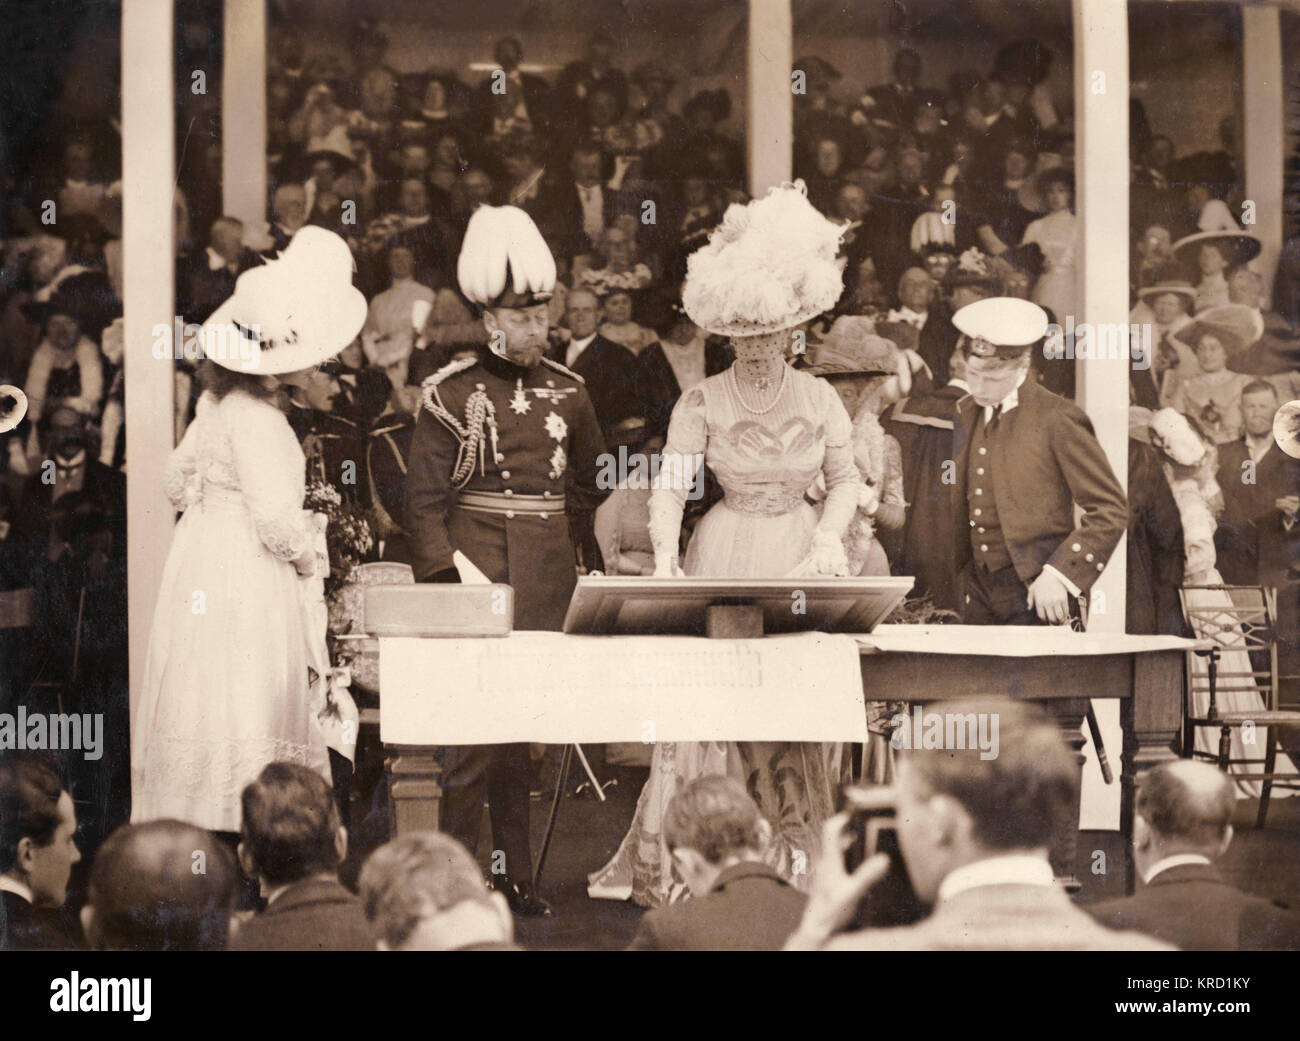 King George V and Queen Mary laying the foundation stone for the National Library at Aberystwyth, Wales.  The Prince of Wales (later Edward VIII) and Princess Mary are also present.       Date: 1911 Stock Photo